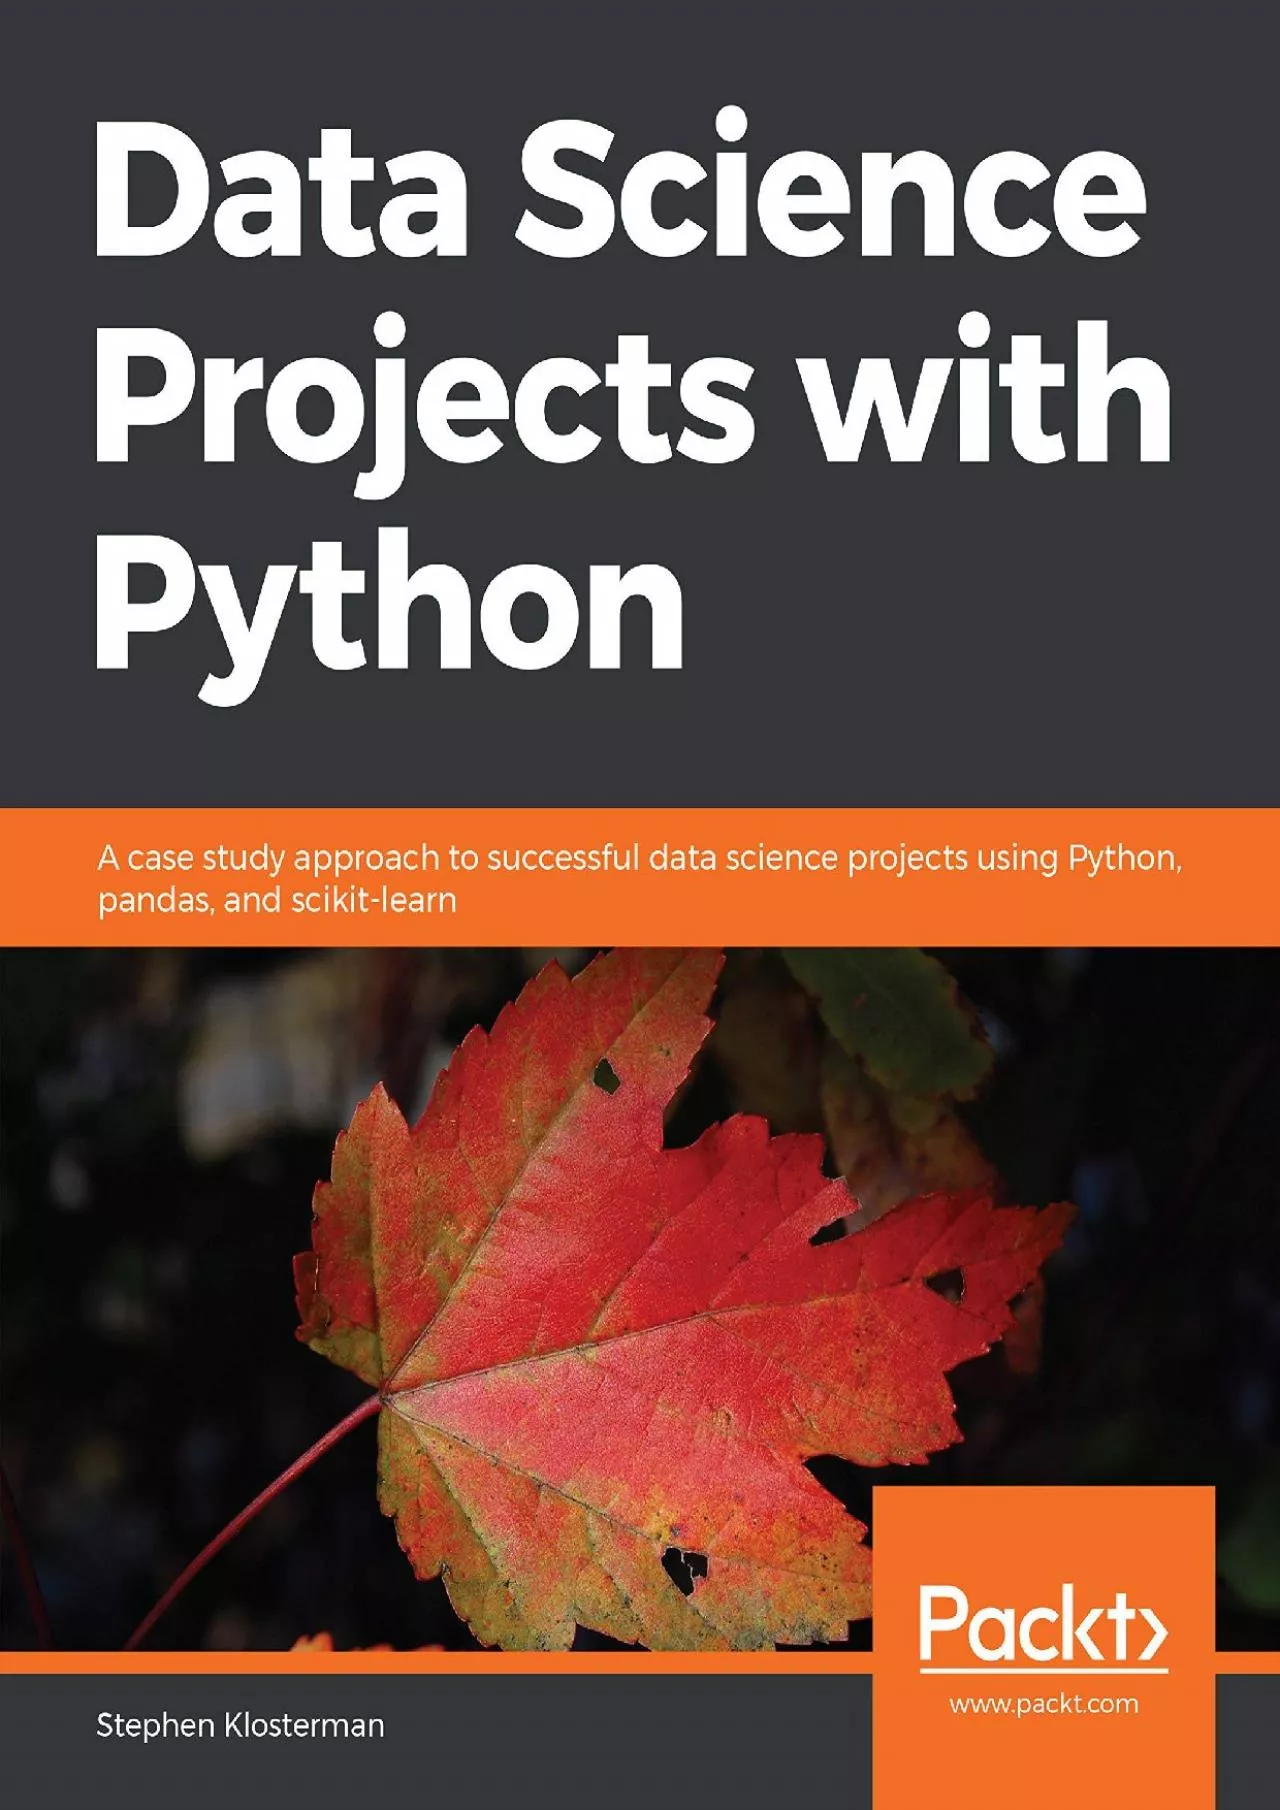 [READING BOOK]-Data Science Projects with Python: A case study approach to successful